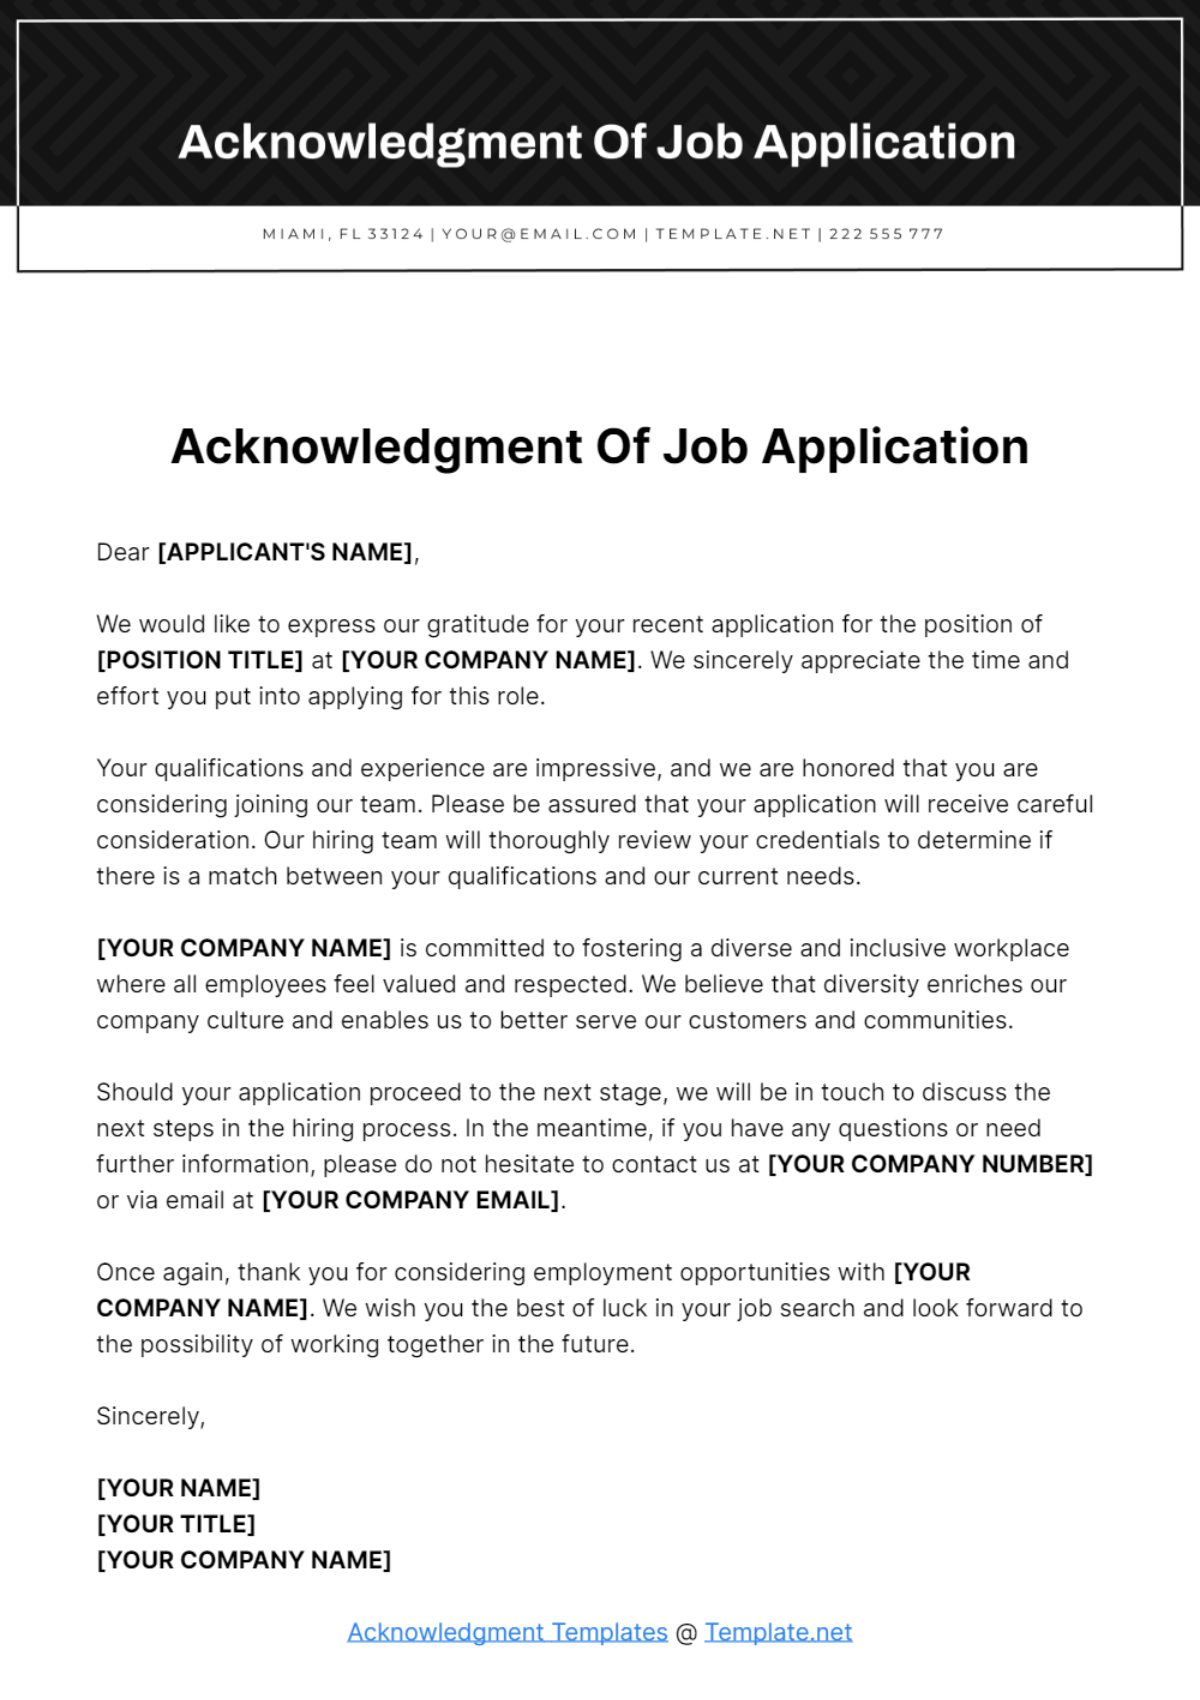 Acknowledgment Of Job Application Template